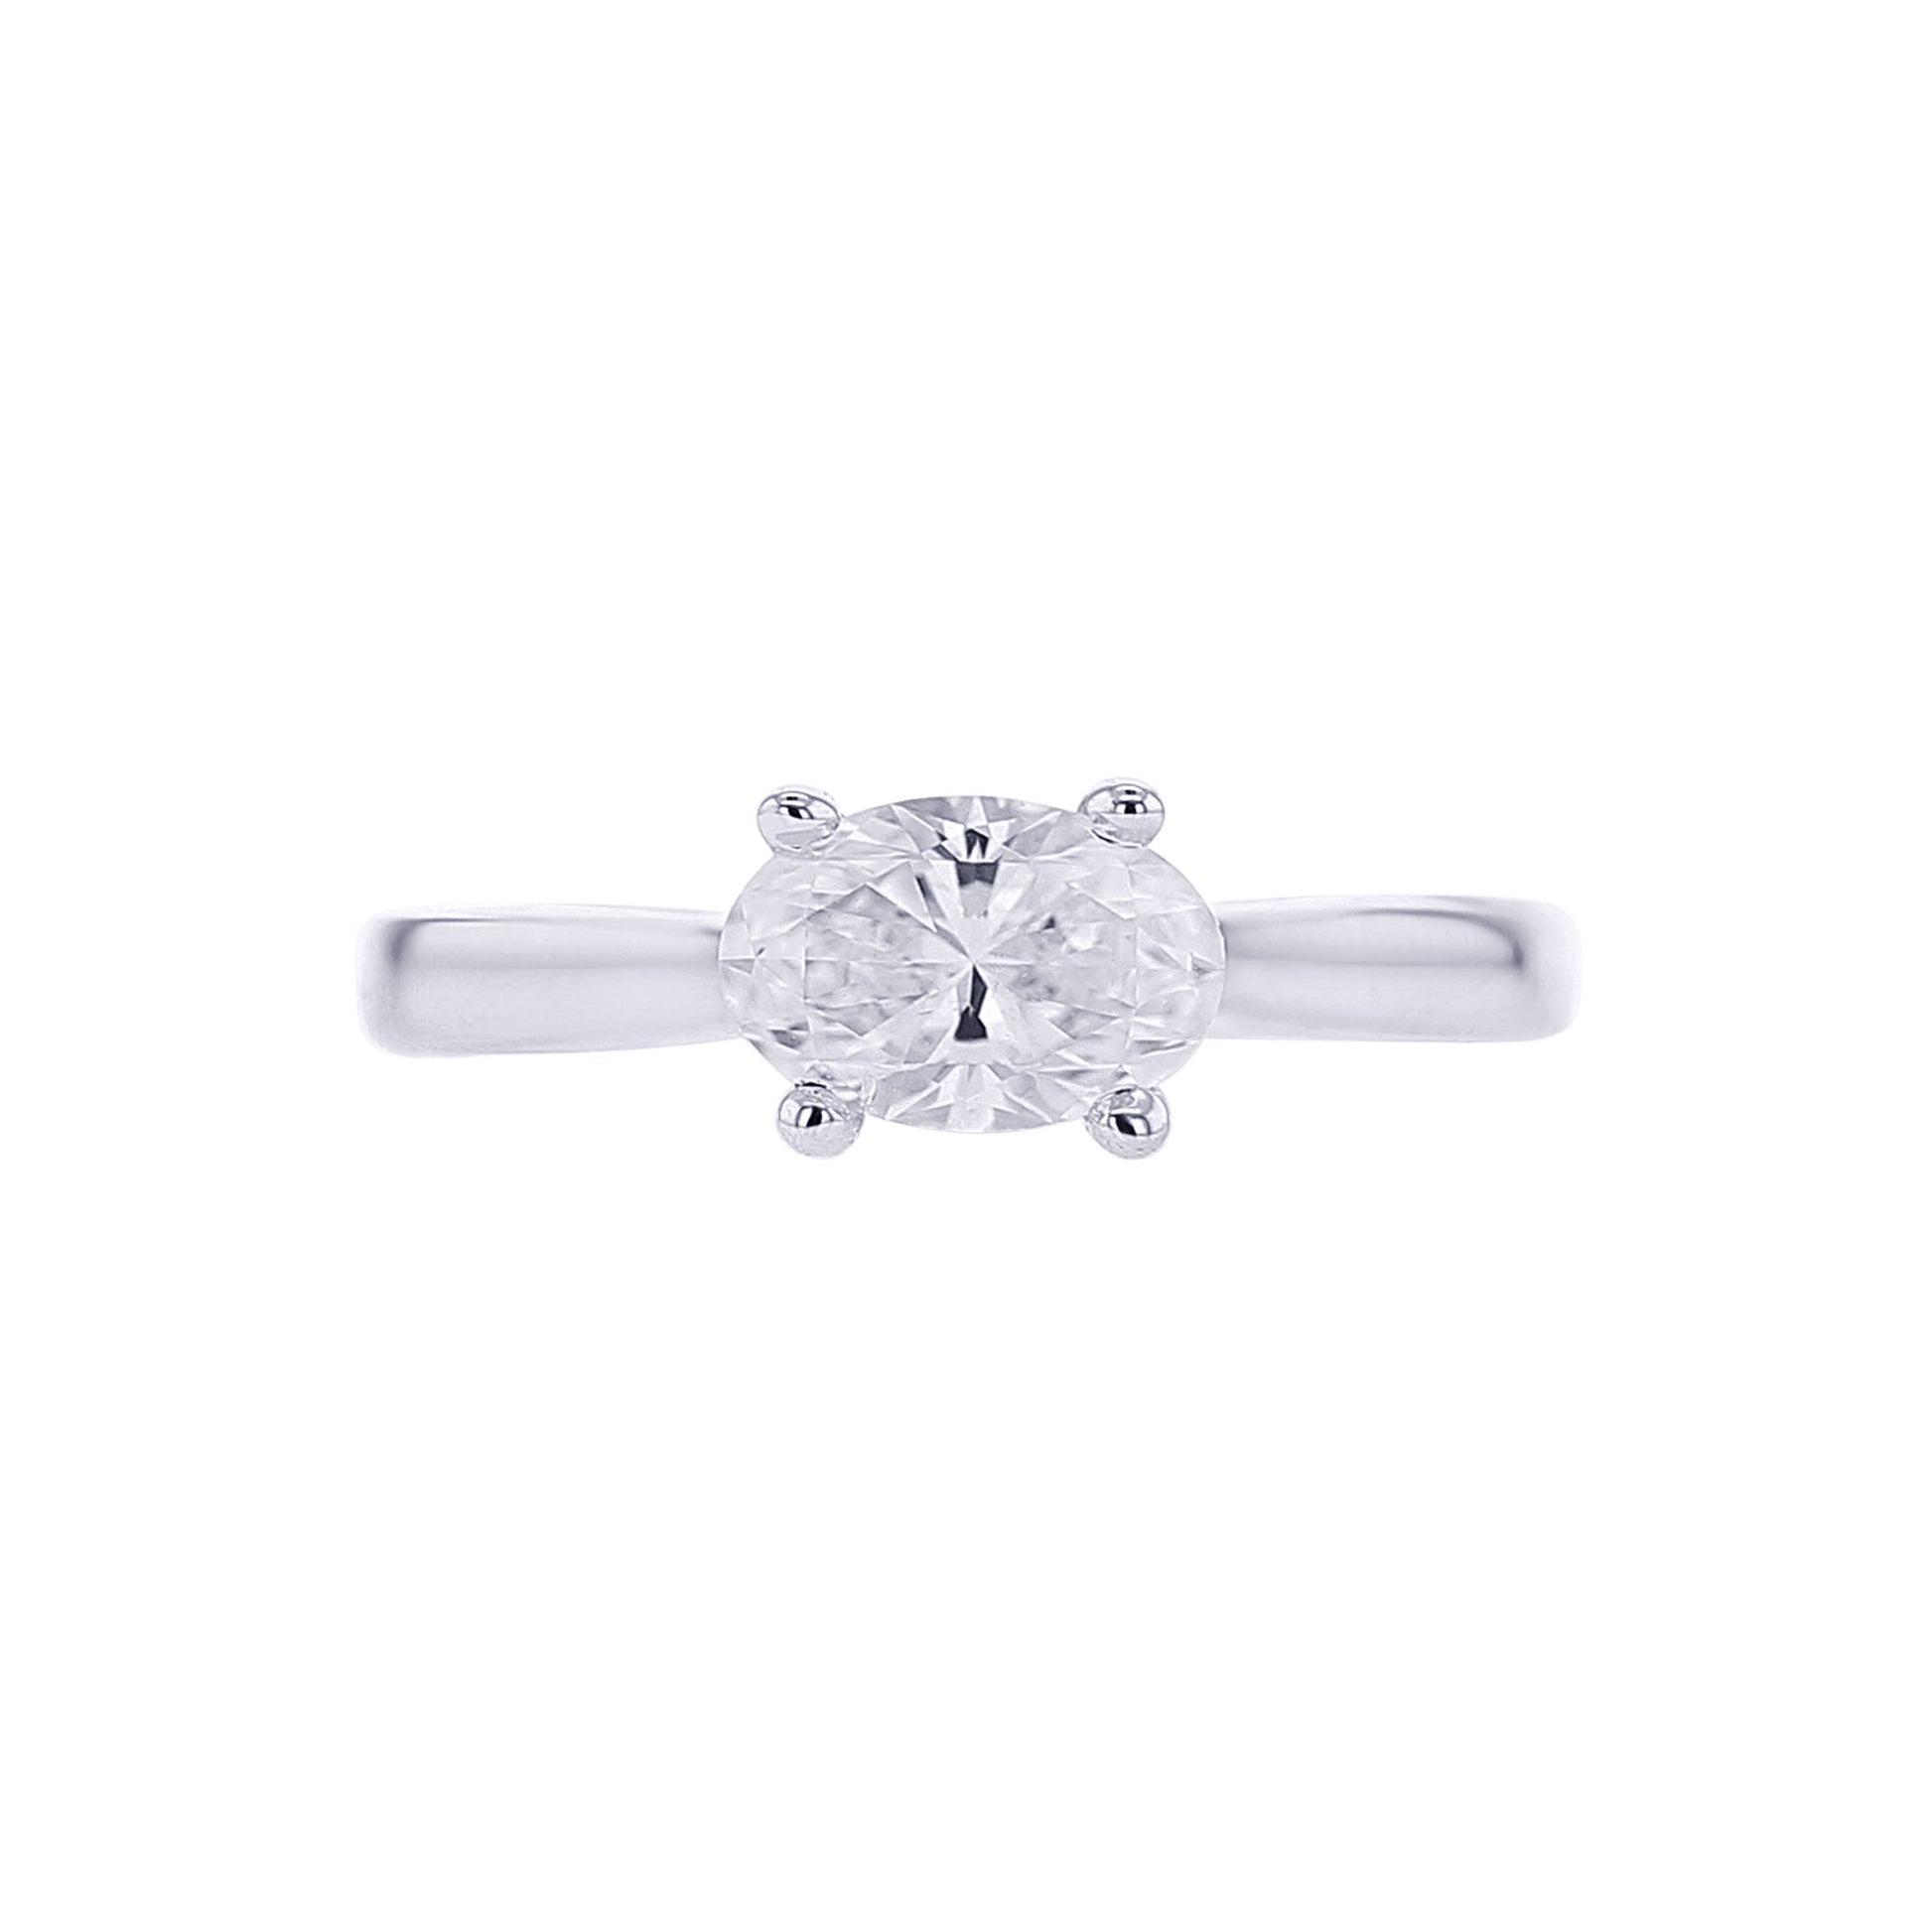 Constanza Ready for Love Certified Diamond Engagement Ring 9/10ct